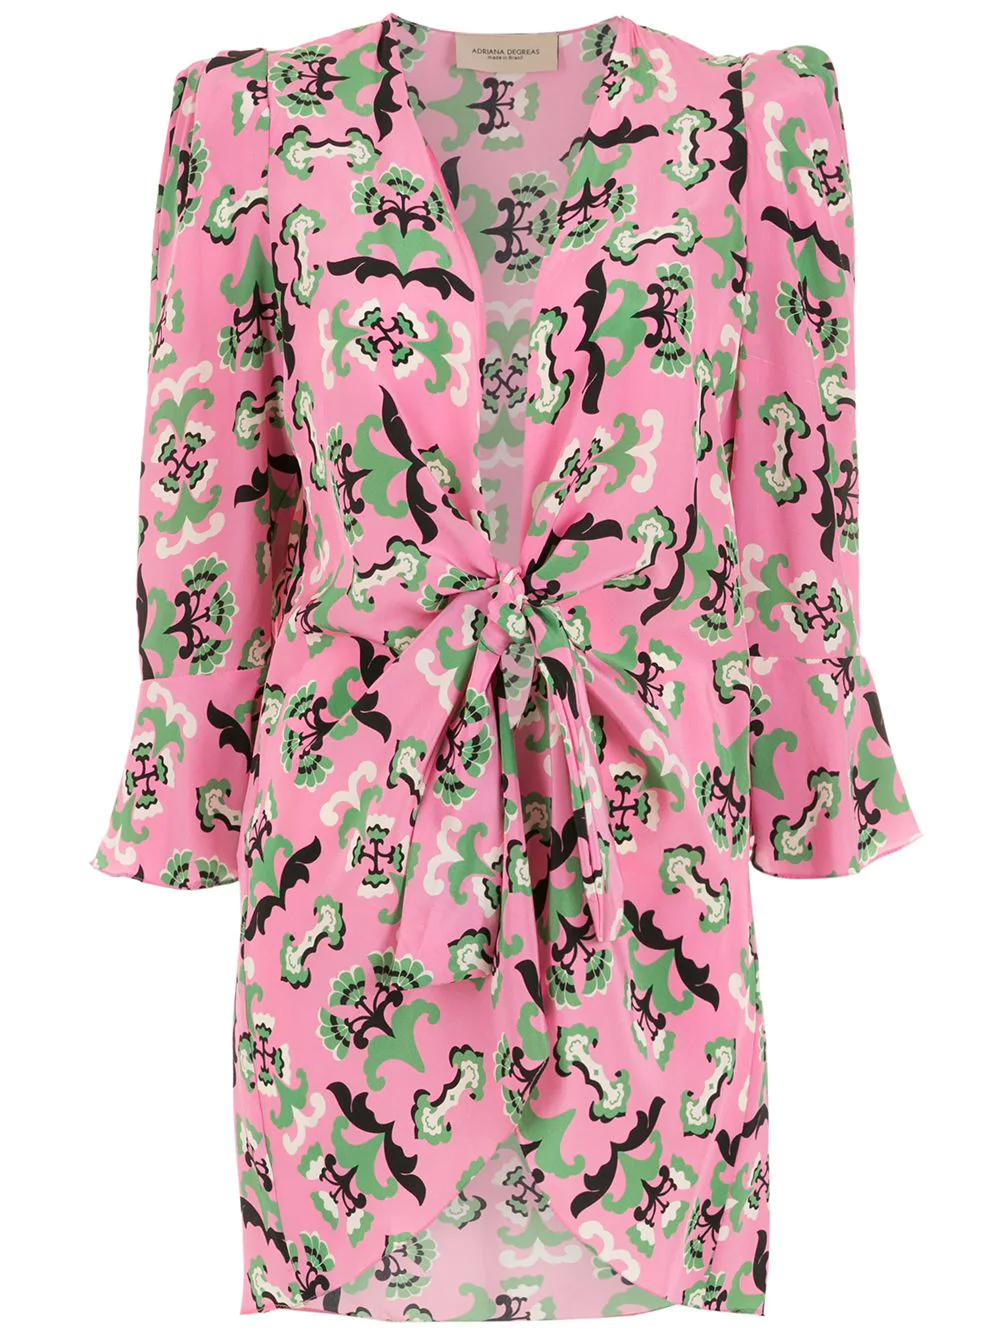 Twisted Flower Pink Puff Sleeved Shirt Product